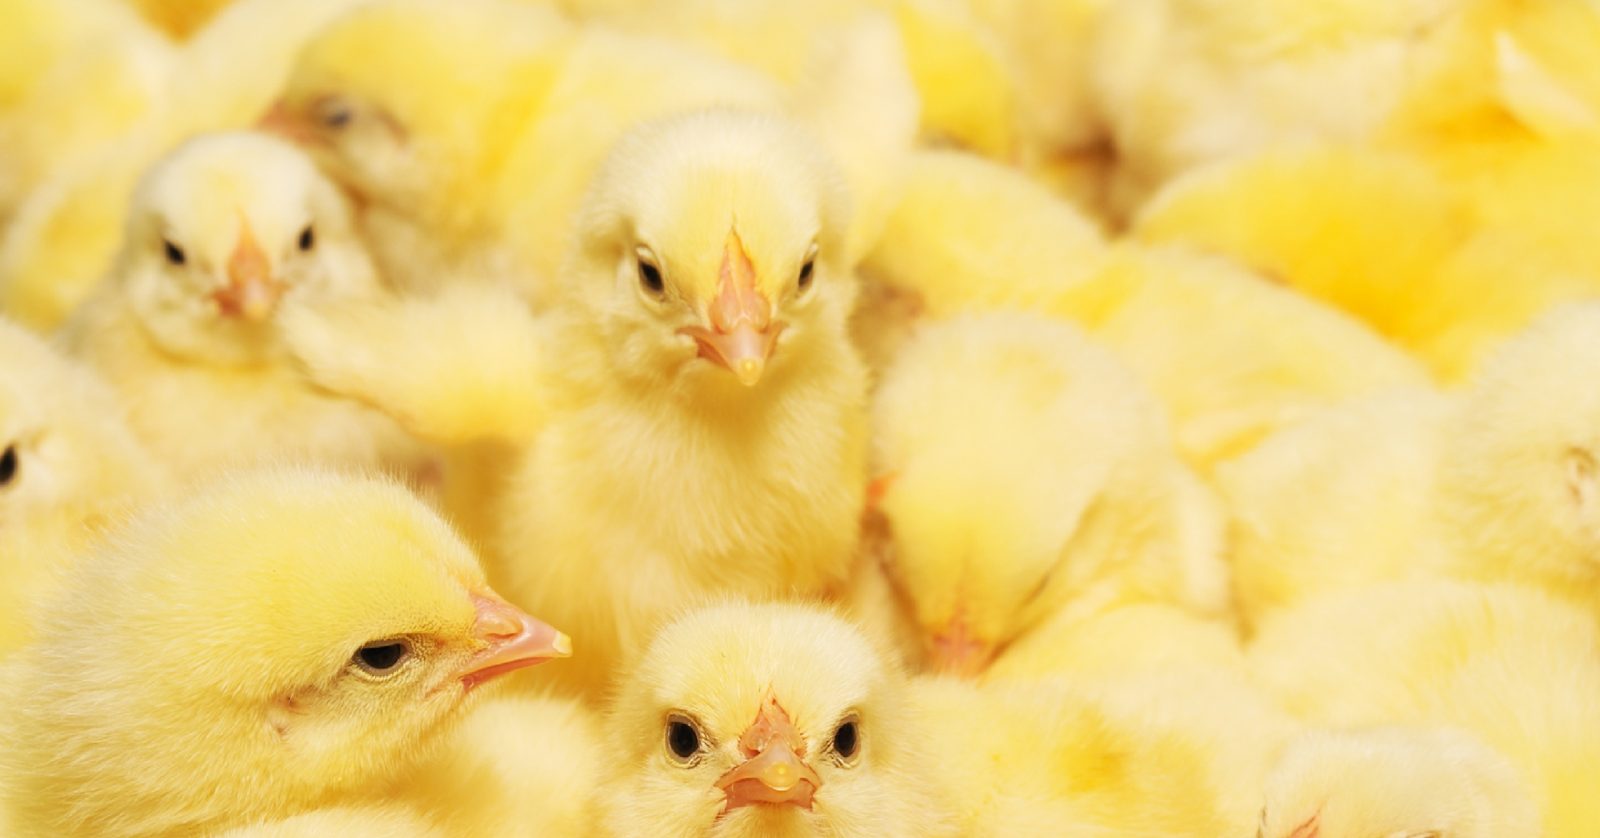 Build a Squad of Cute Baby Animals and We’ll Reveal What People Love Most About You baby chicks